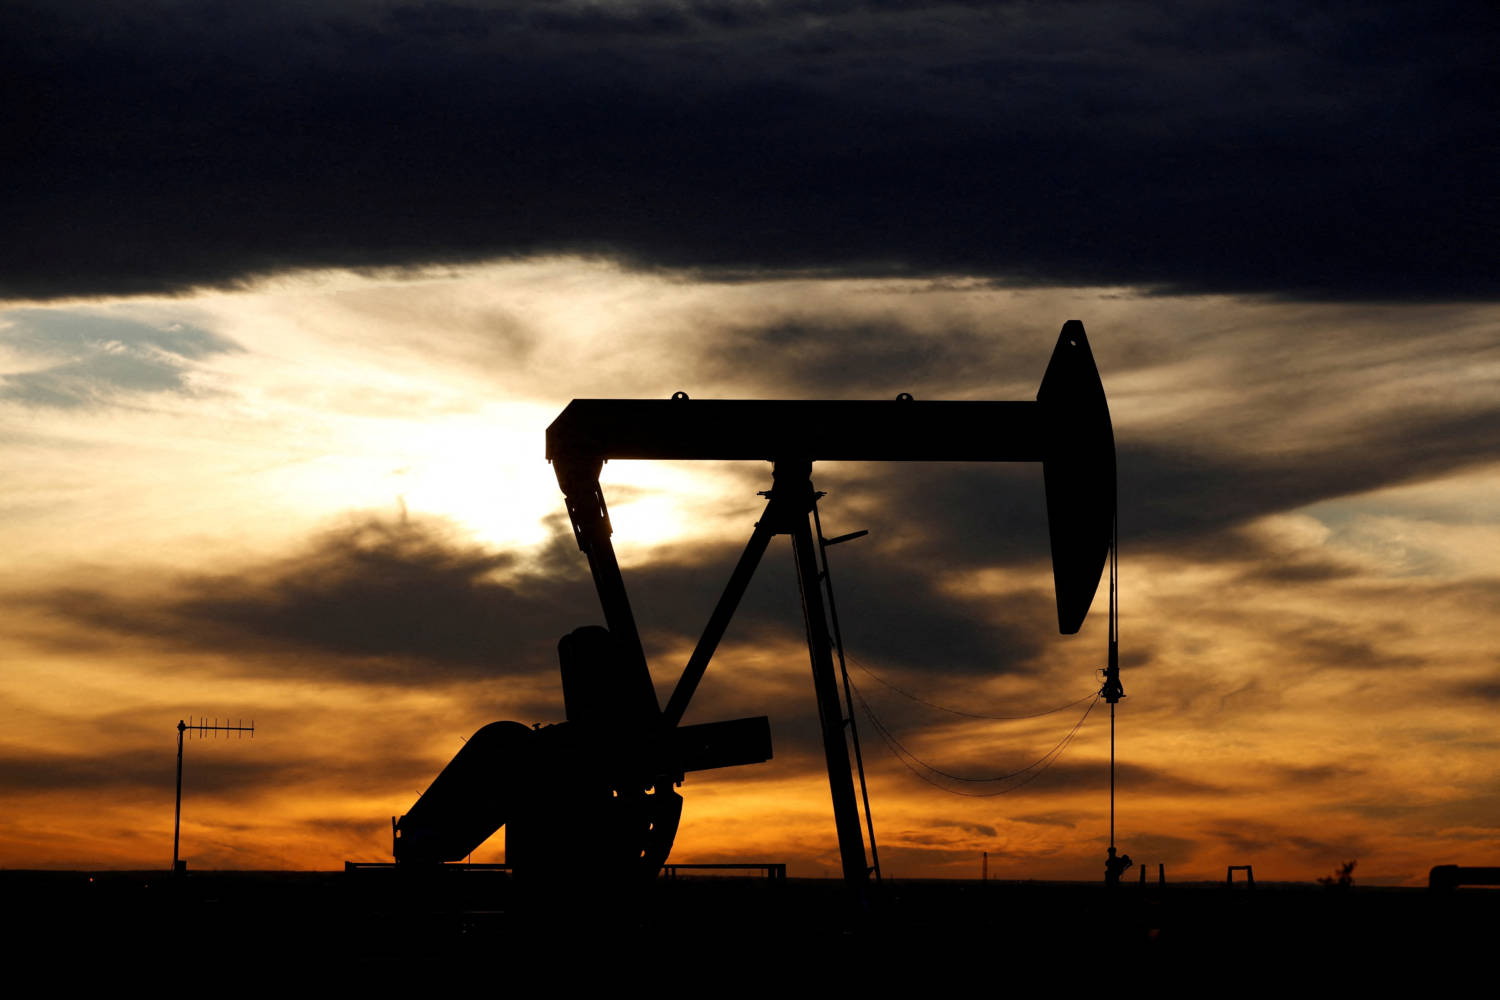 File Photo: The Sun Sets Behind A Crude Oil Pump Jack On A Drill Pad In The Permian Basin In Texas